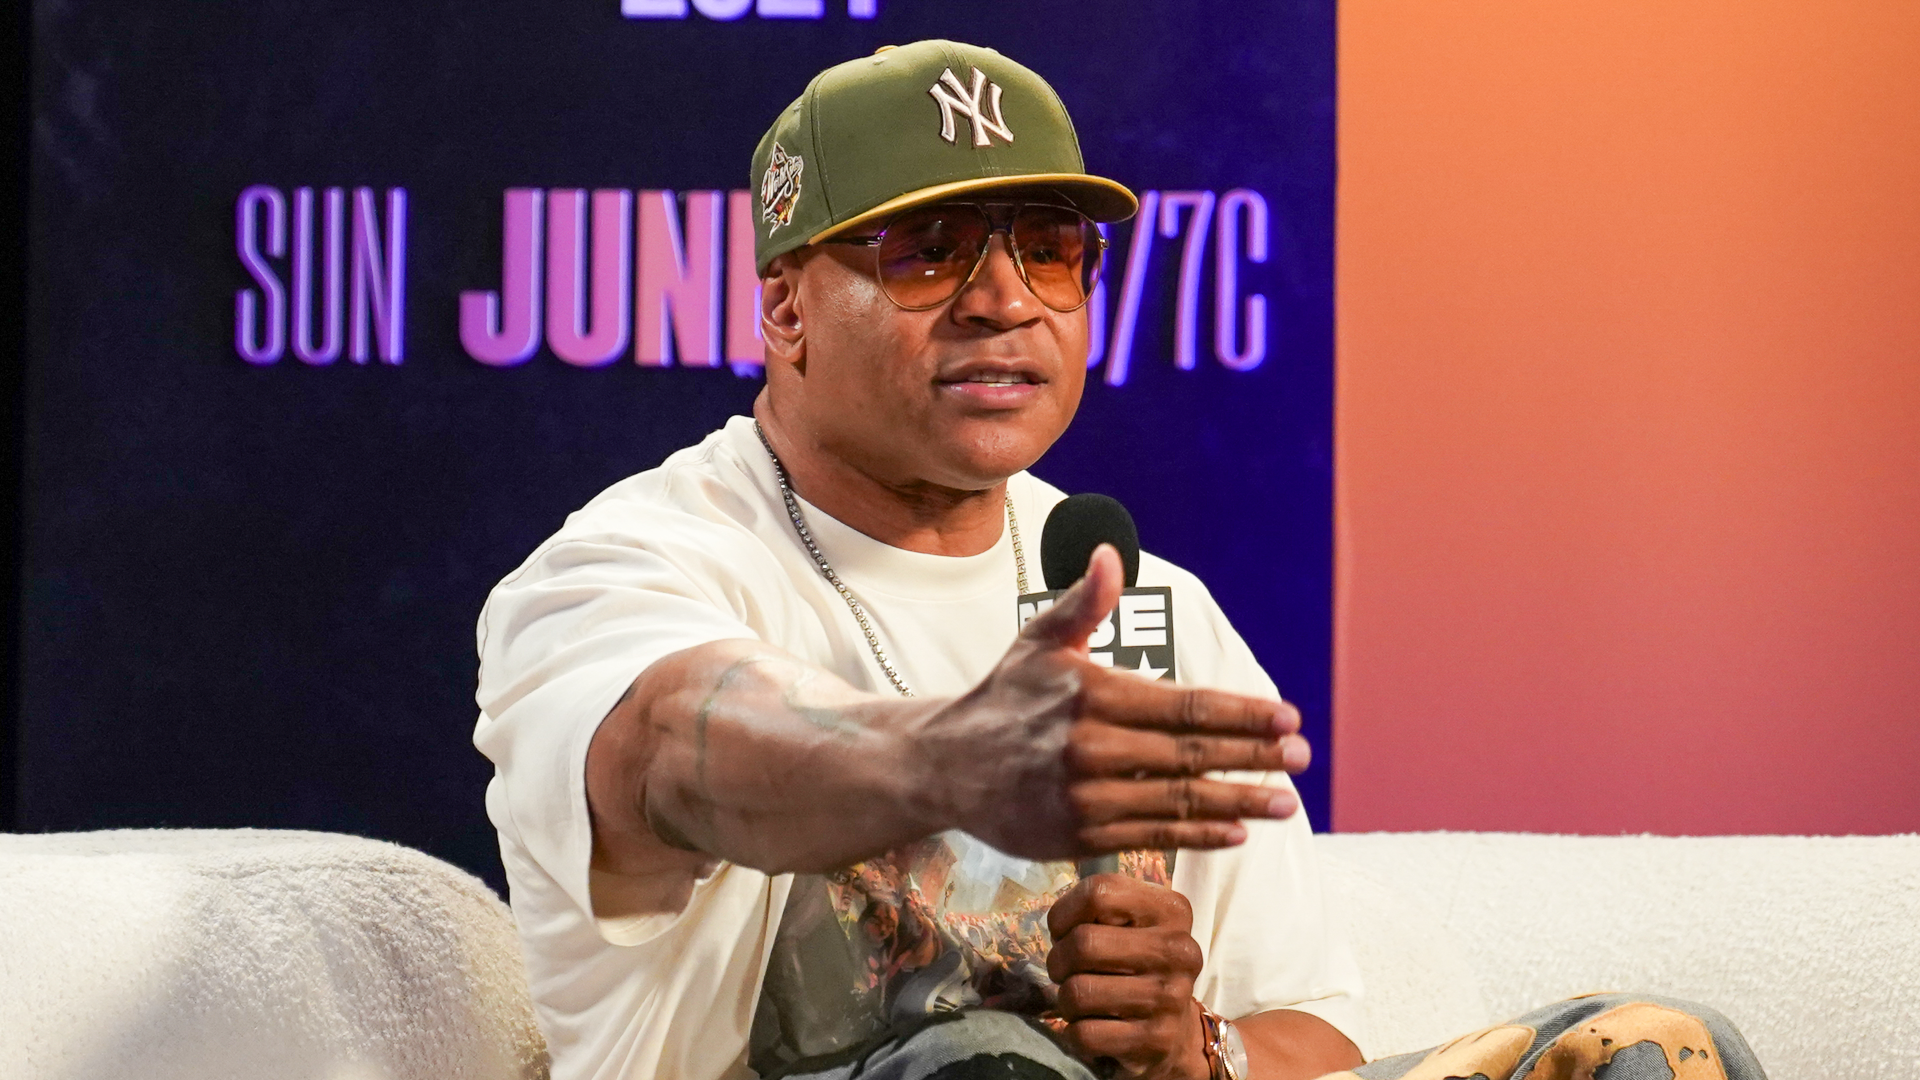 LL Cool J Is Tired Of Rappers Who Only Talk About Money: “The Wallet Can’t Un-Corny You”